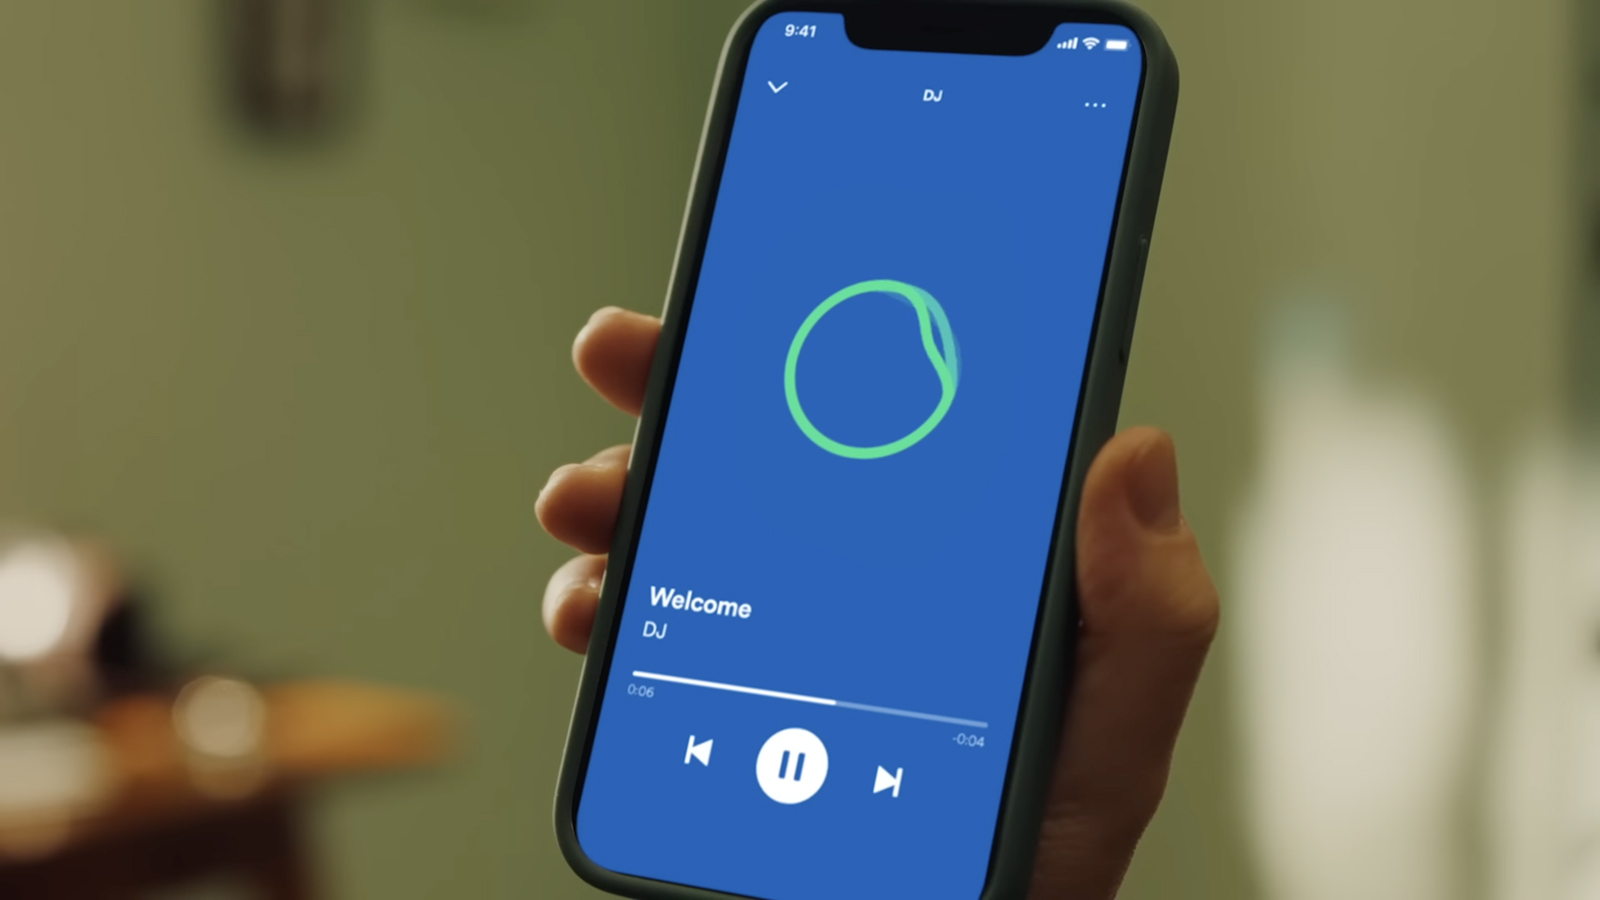 Spotify AI DJ on a phone being held in a hand